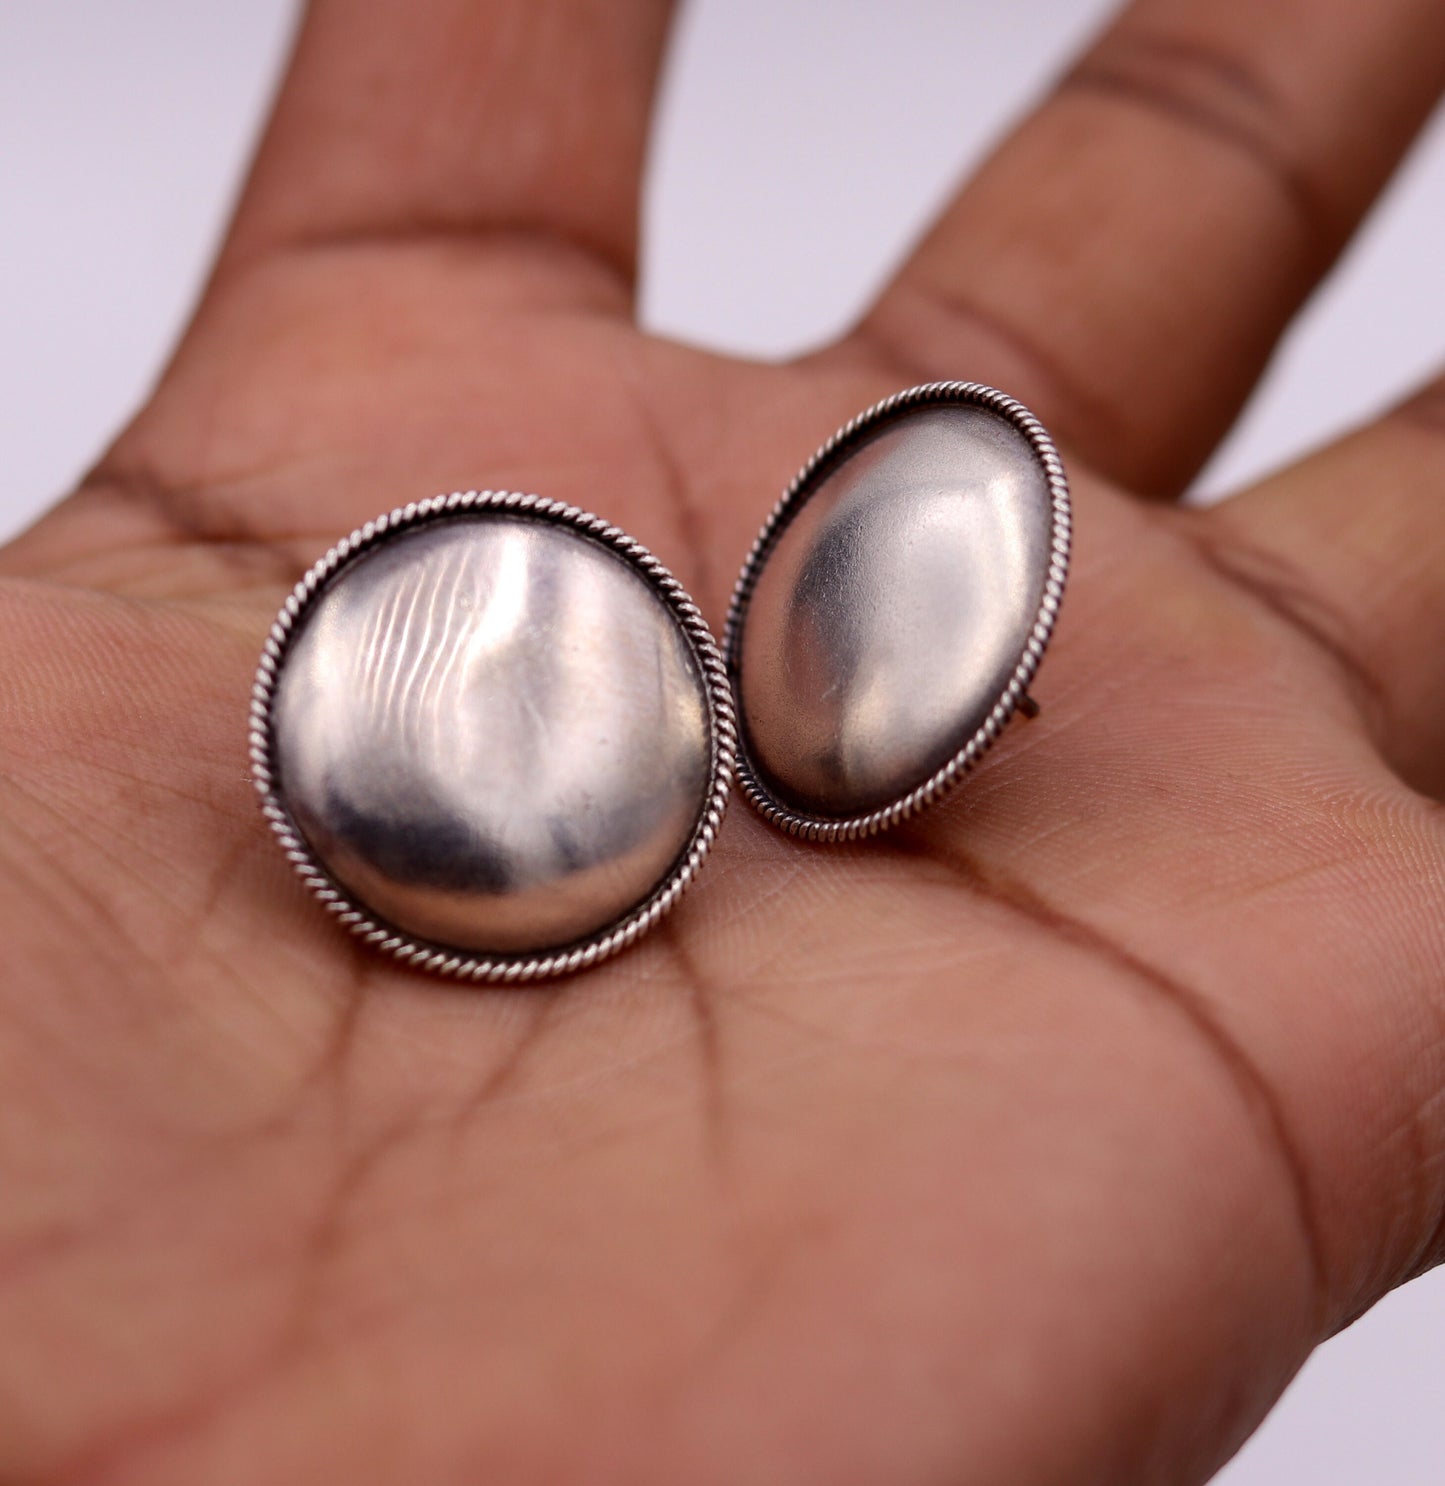 Vintage design 925 sterling silver plain style handmade round design fabulous Stud earrings tribal jewelry from Rajasthan india  s523 - TRIBAL ORNAMENTS